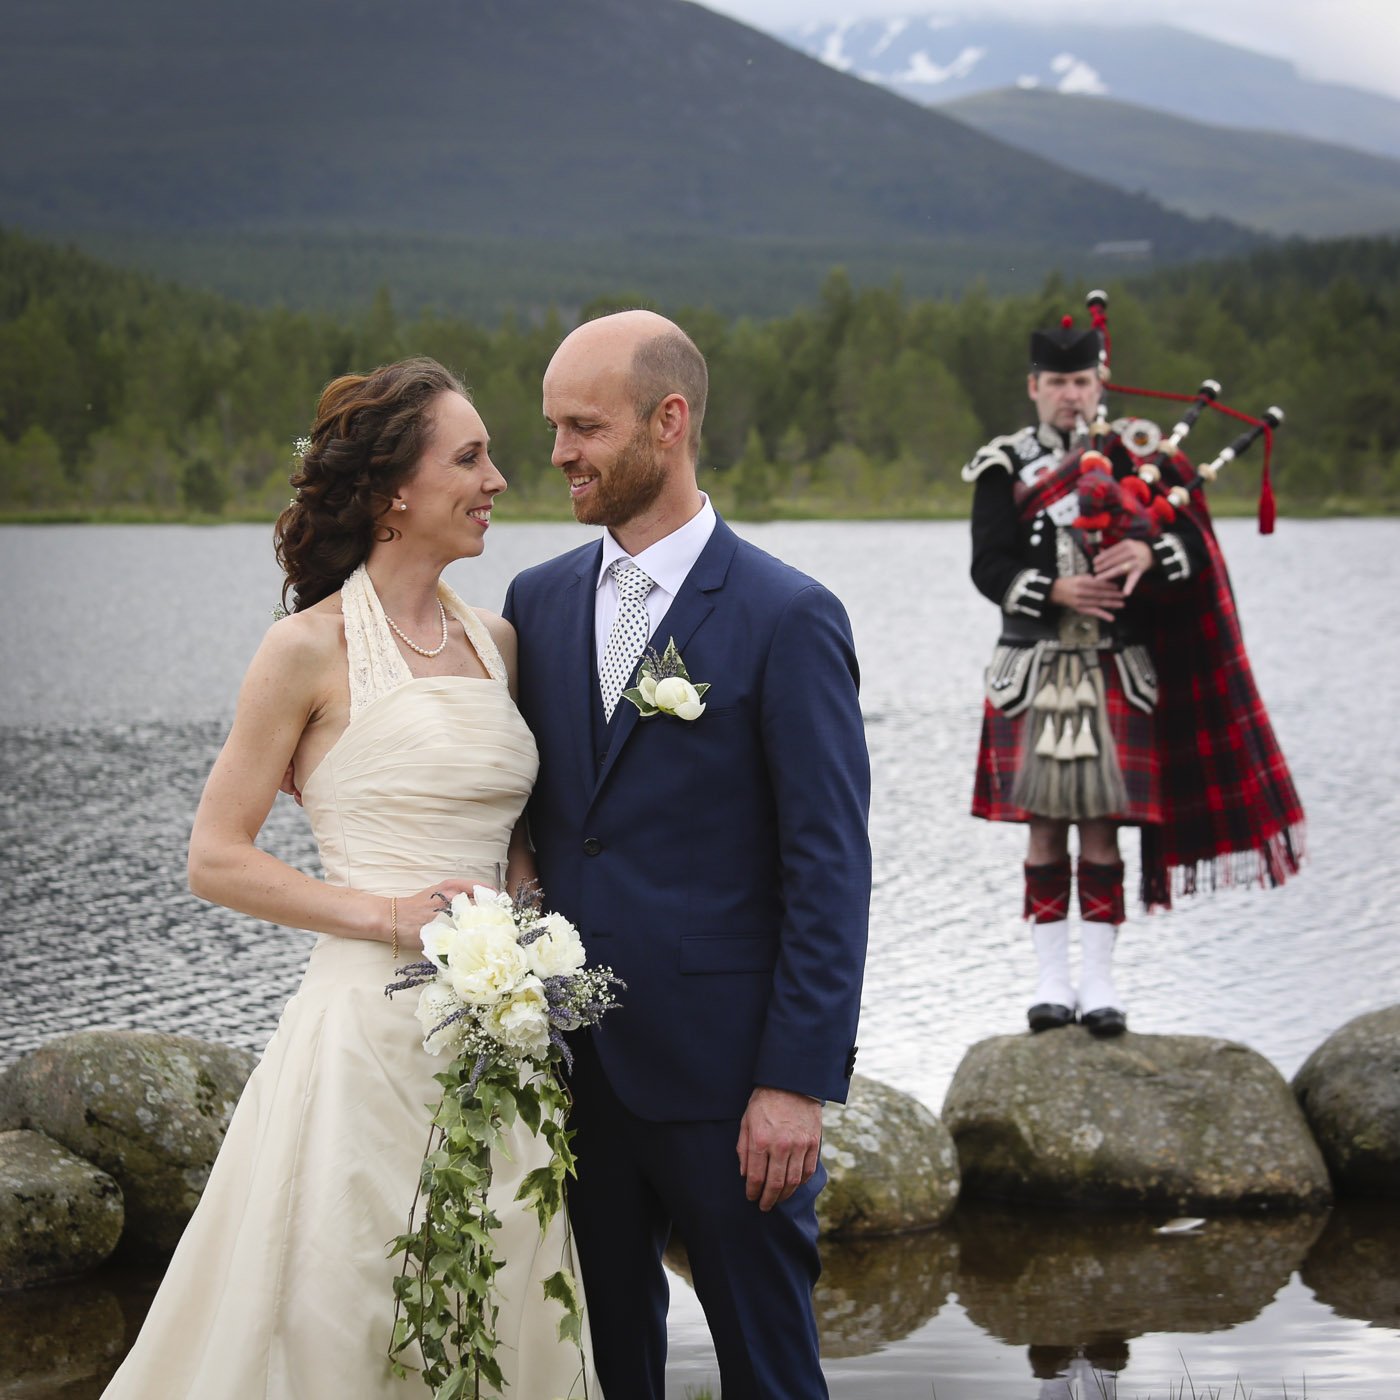 wedding photography at the Hilton Coylumbridge and Loch Morlich, Aviemore-1023-4 - Copy